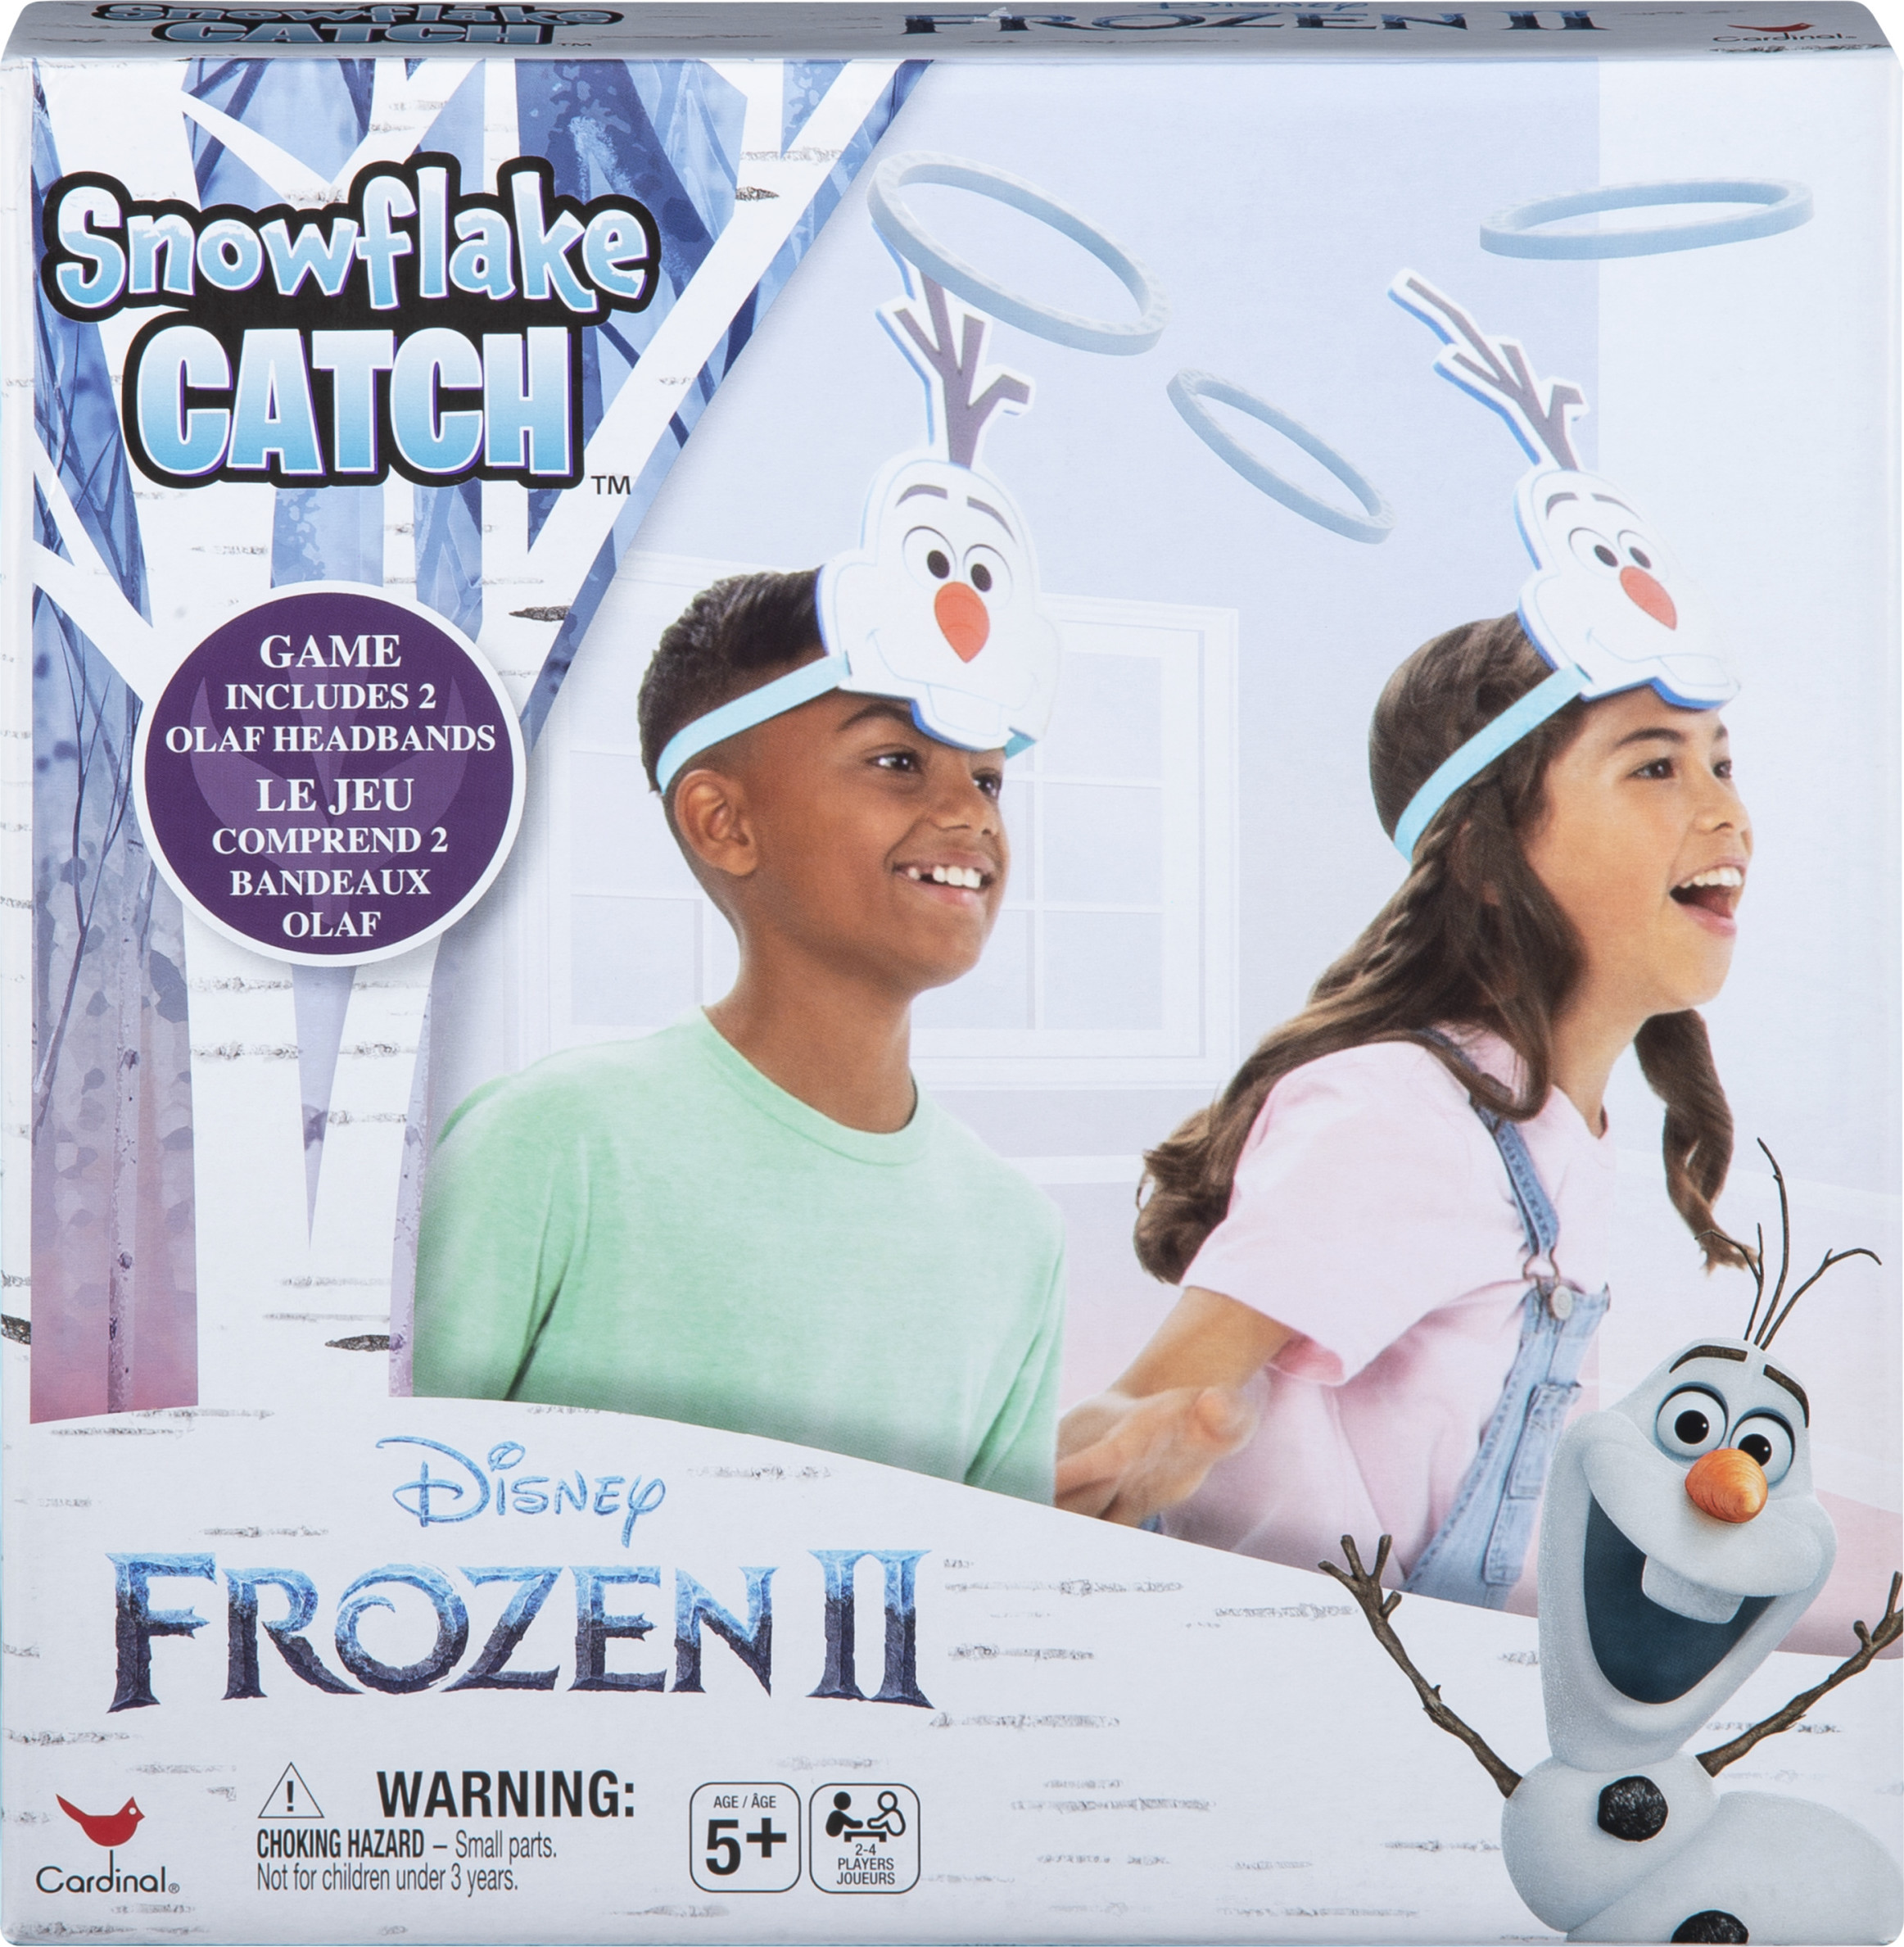 Disney Frozen 2 Up and Active Olaf Snowflake Catch Game for Kids and Families - image 1 of 4